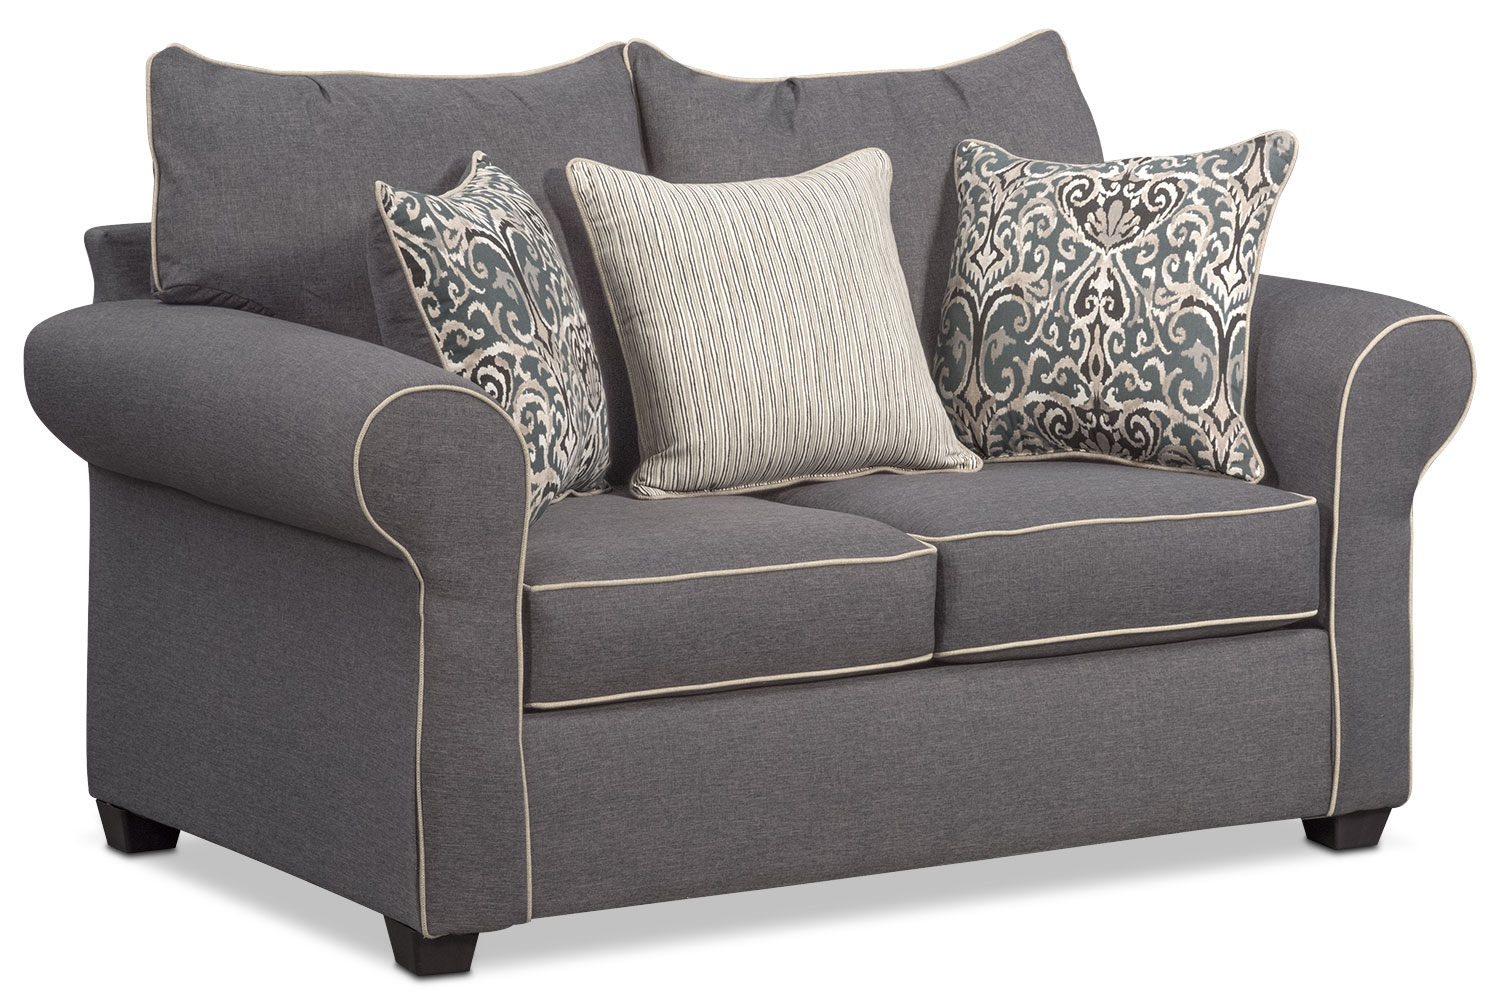 Carla Queen Sleeper Sofa, Loveseat, and Accent Chair Set